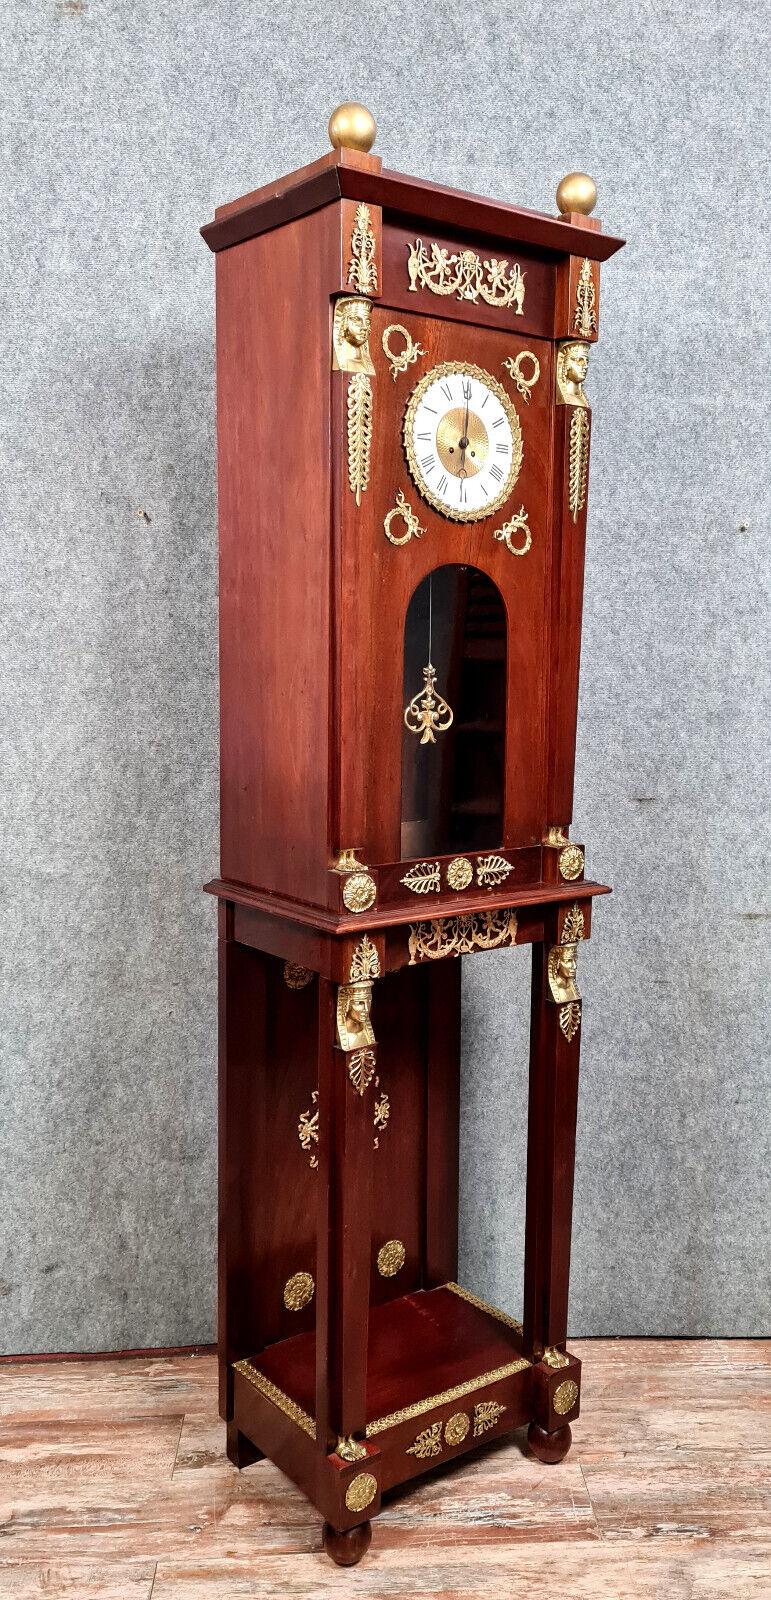 Elevate your home decor with this impressive and museum-worthy parquet regulator clock in the Empire style, crafted from luxurious mahogany wood. Dating back to around 1880, this stunning piece features an abundance of gilt and sculpted bronze